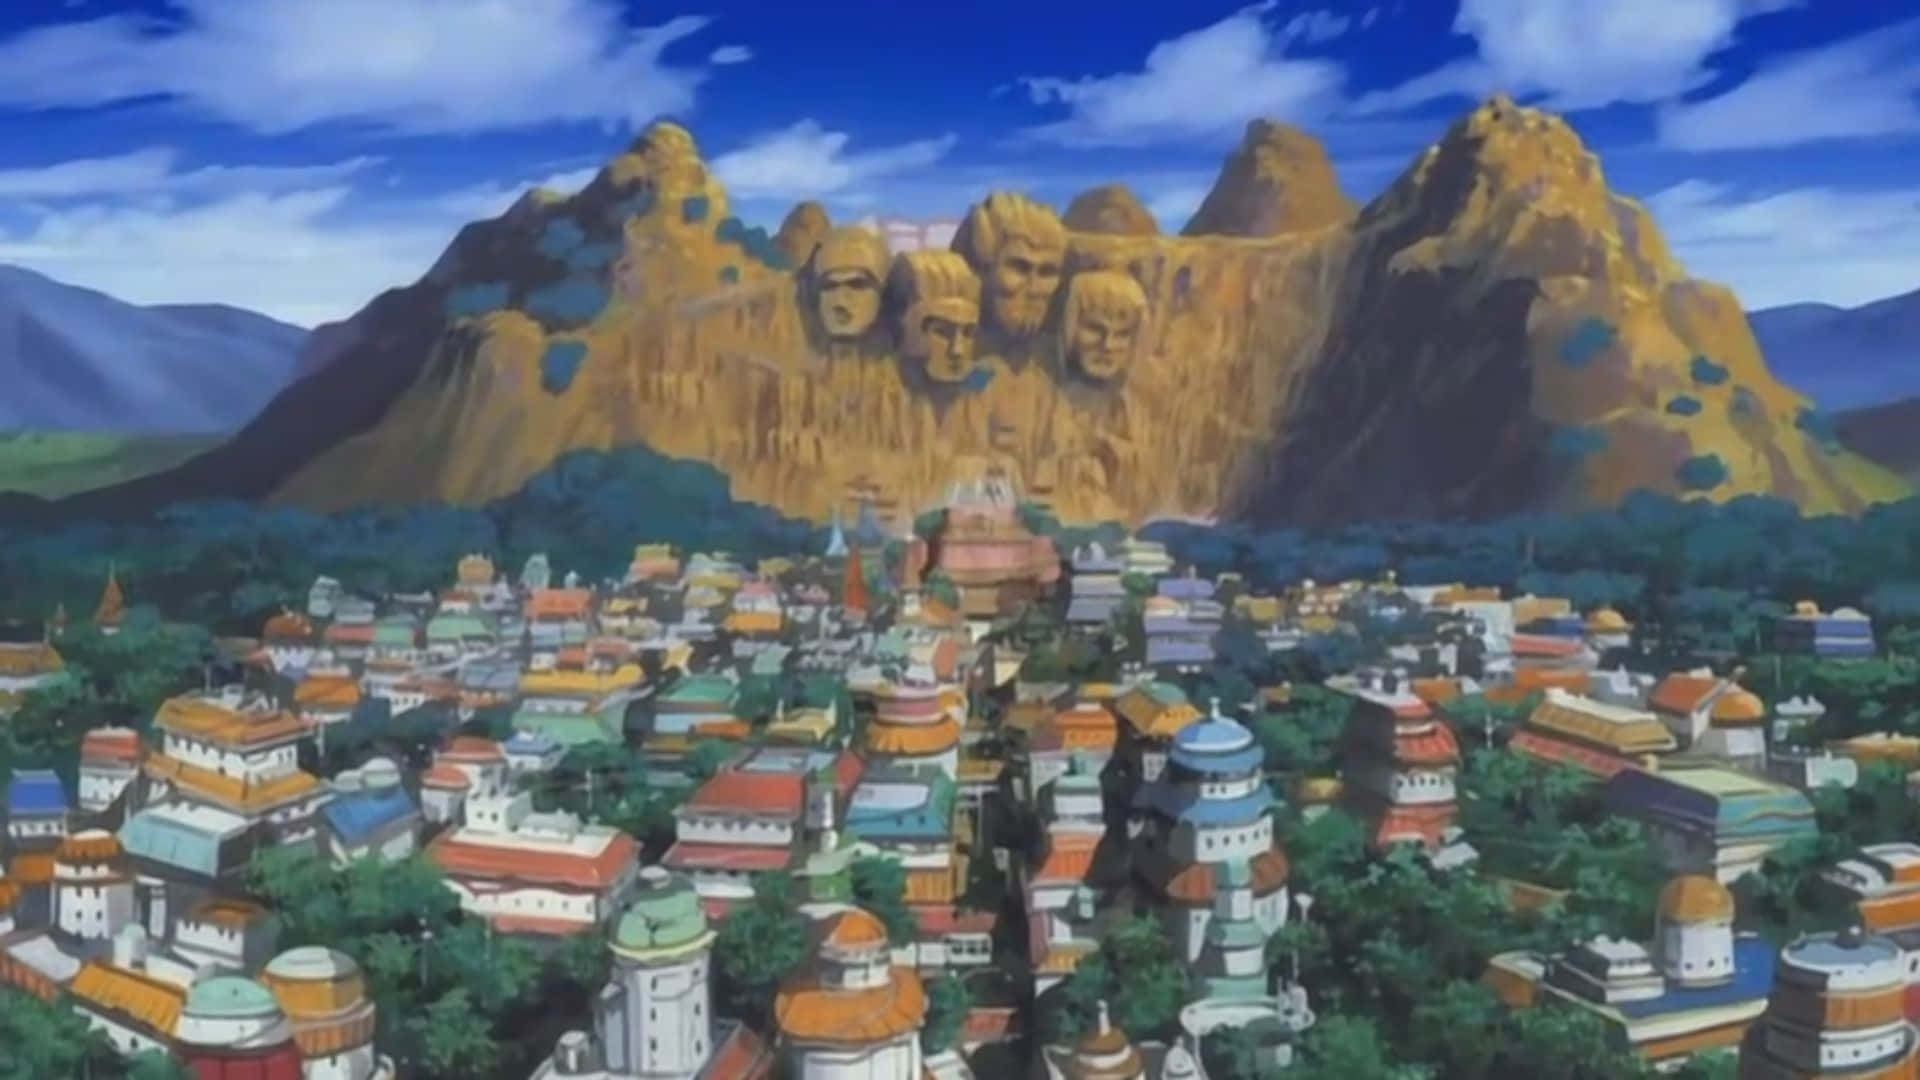 Find inner peace in the peaceful village of Konoha Wallpaper